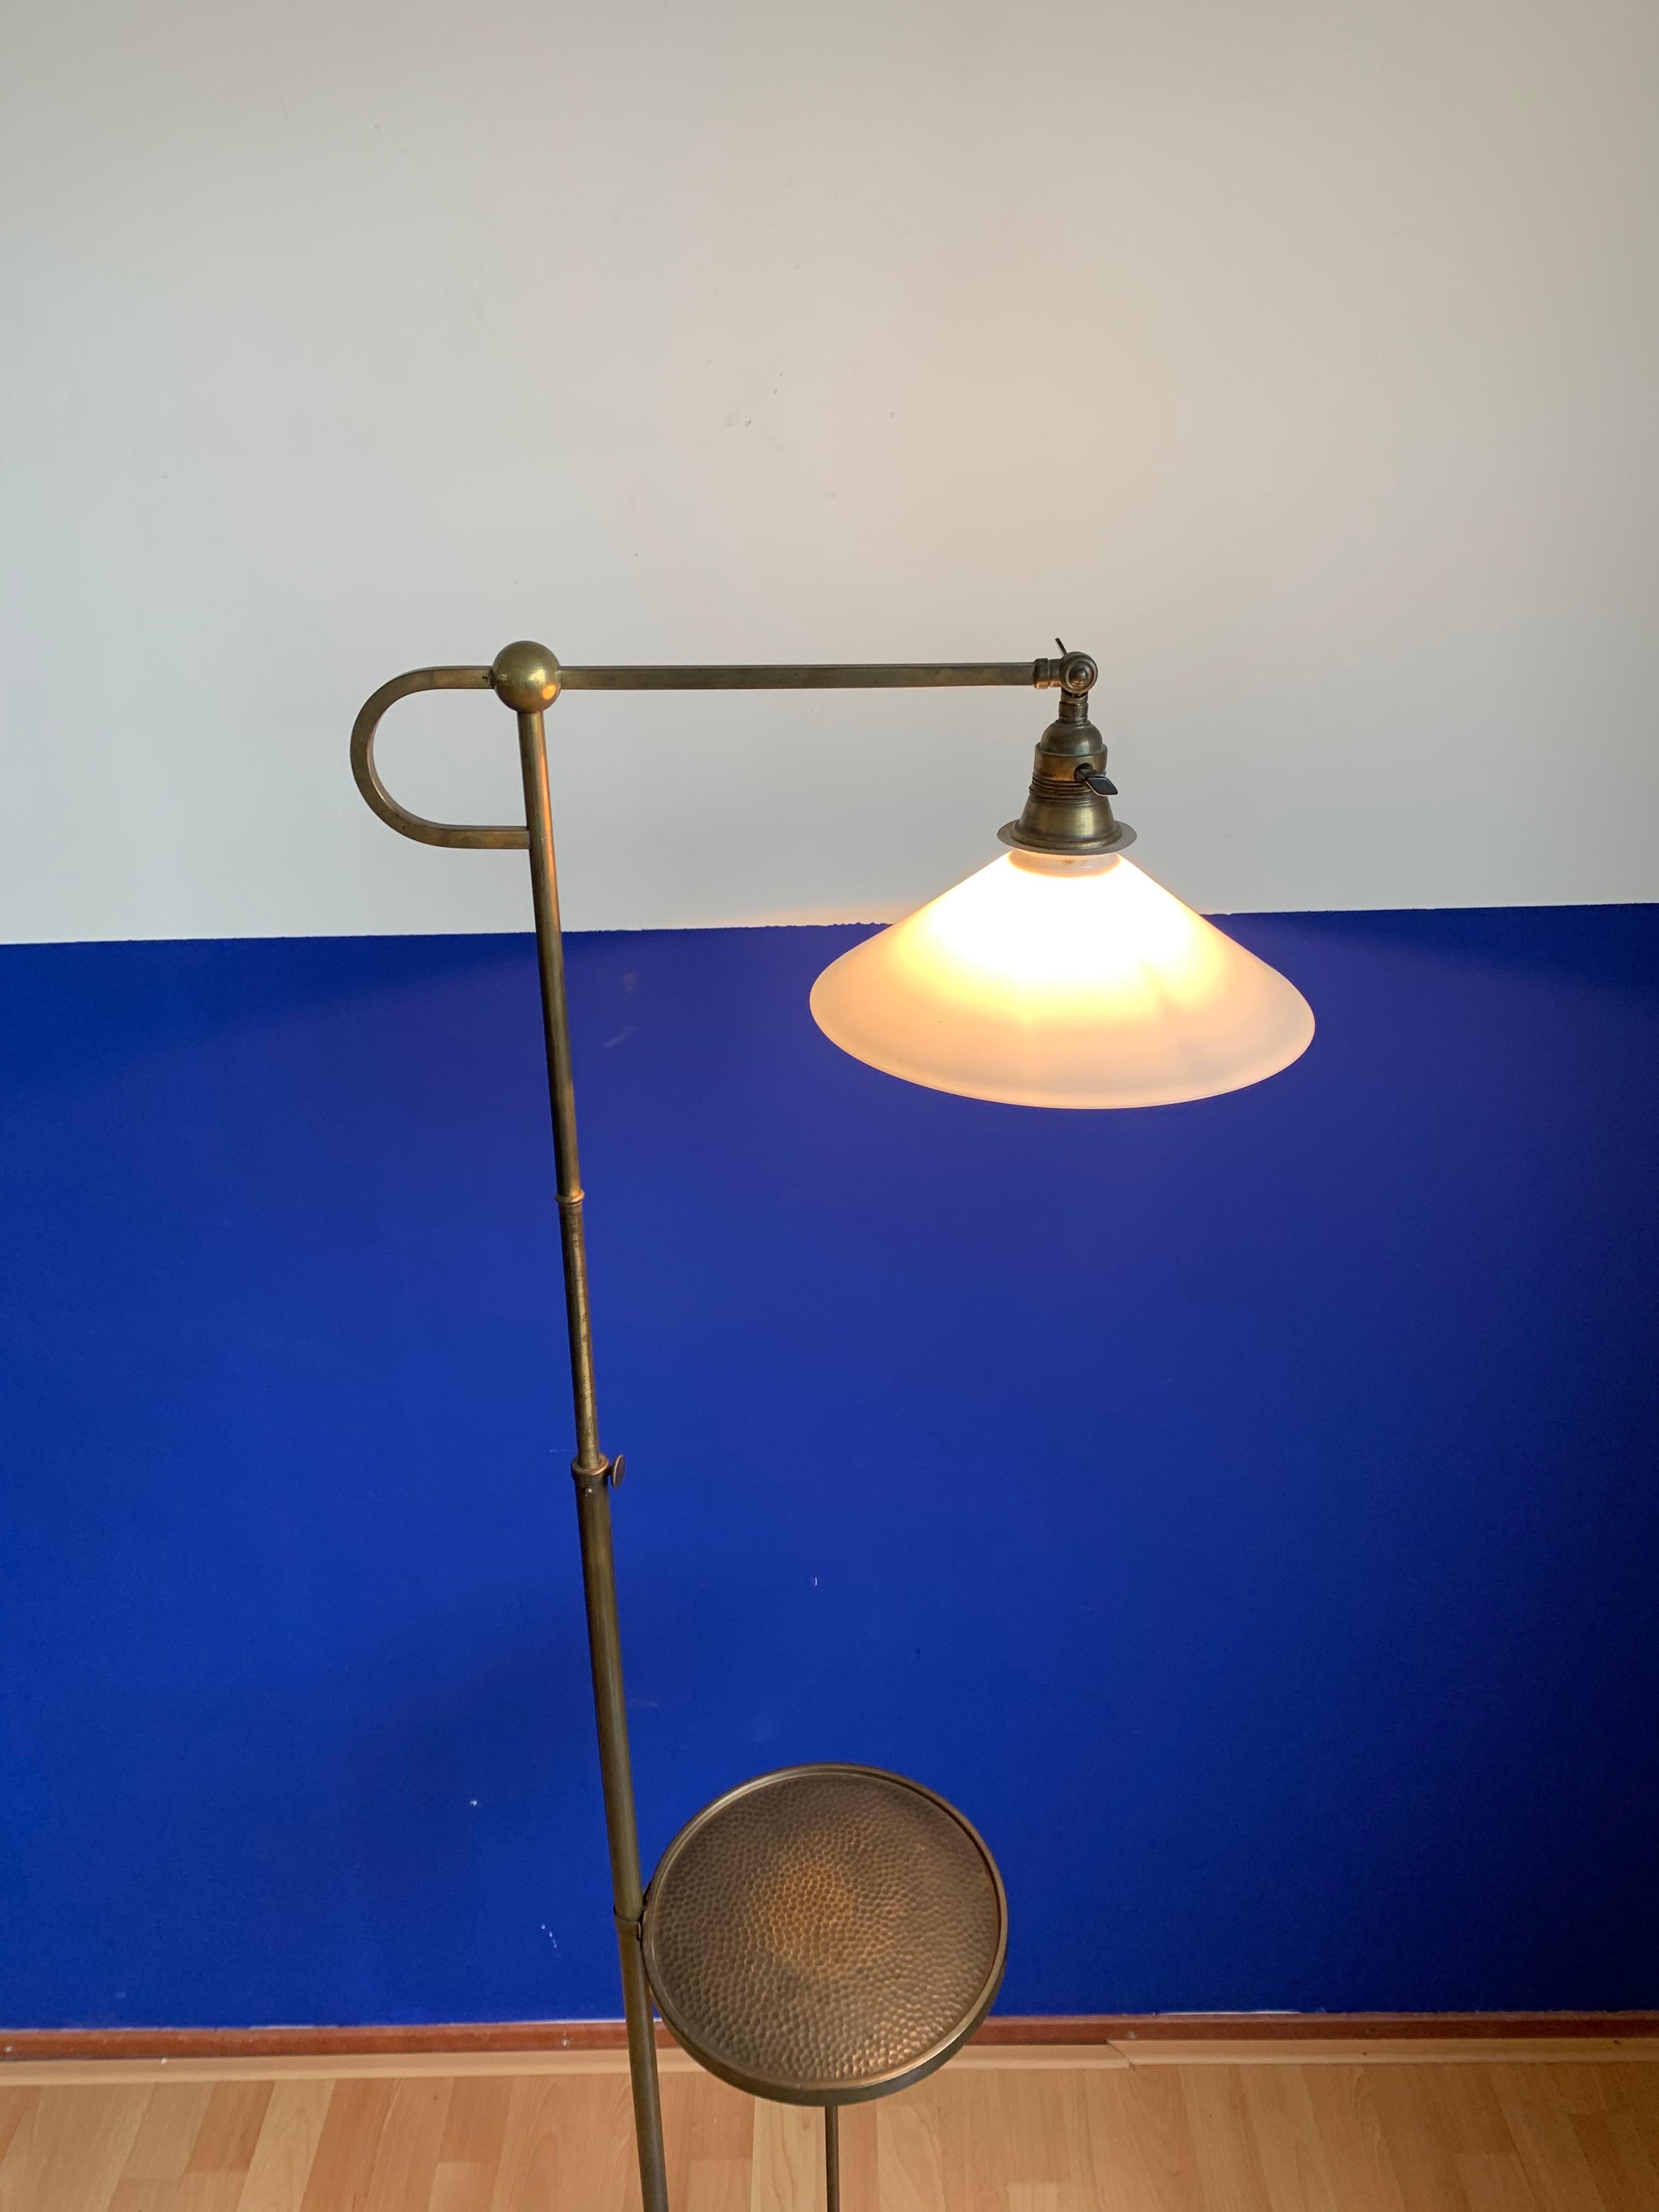 Adjustable Art Deco Brass Floor Lamp w. Opaline Shade and Small Round Table  13